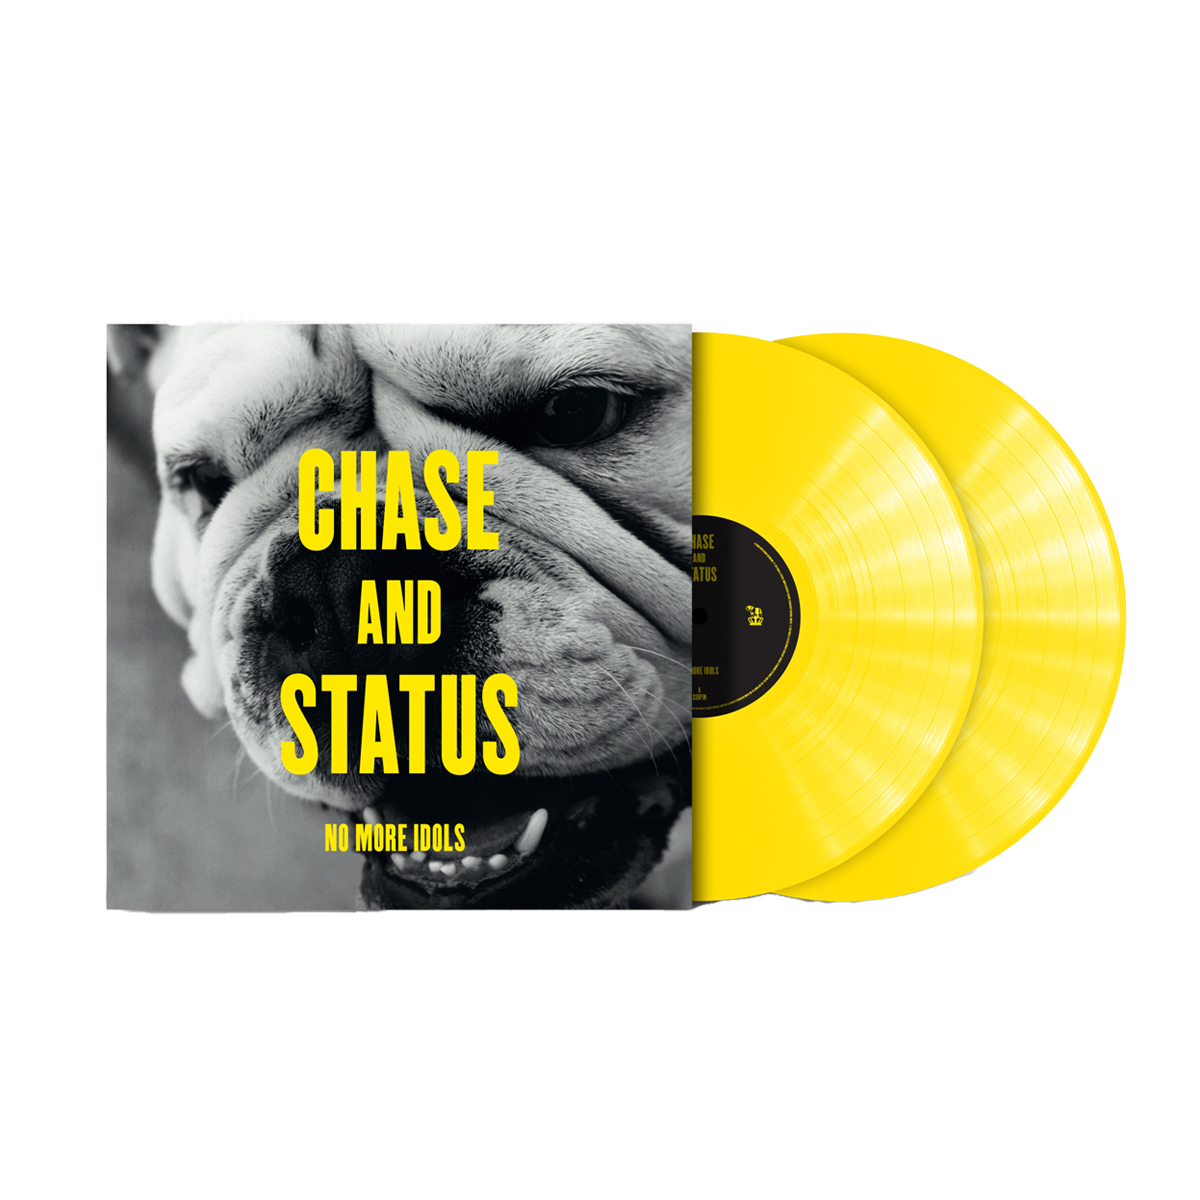 Chase and Status - No More Idols: Exclusive Translucent Yellow Vinyl 2LP